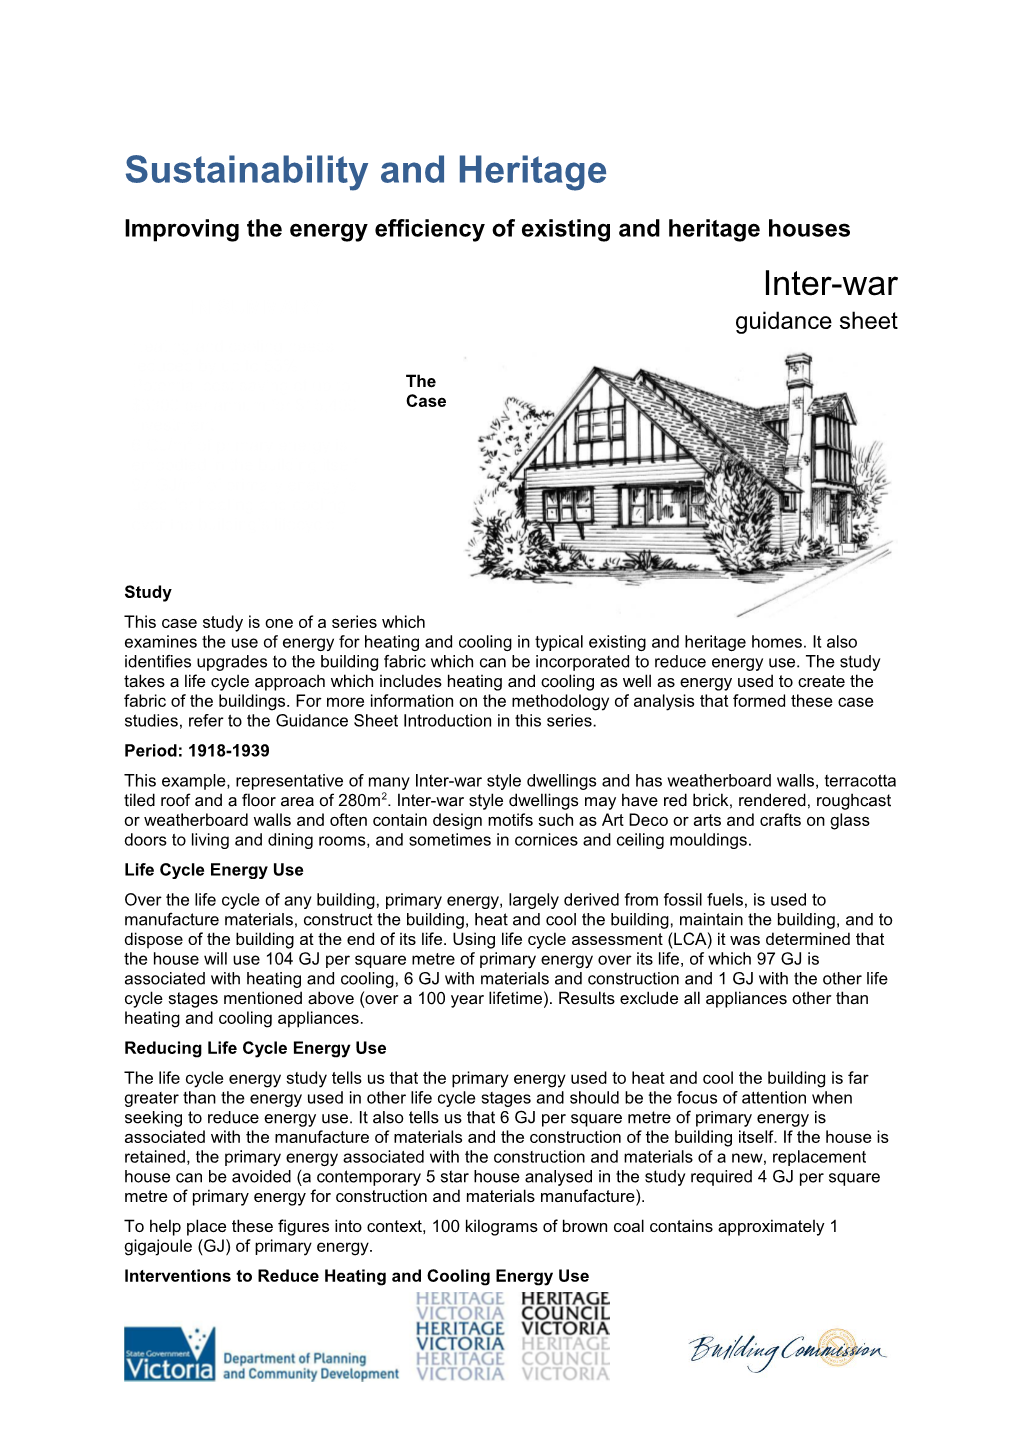 Improving the Energy Efficiency of Existing and Heritage Houses